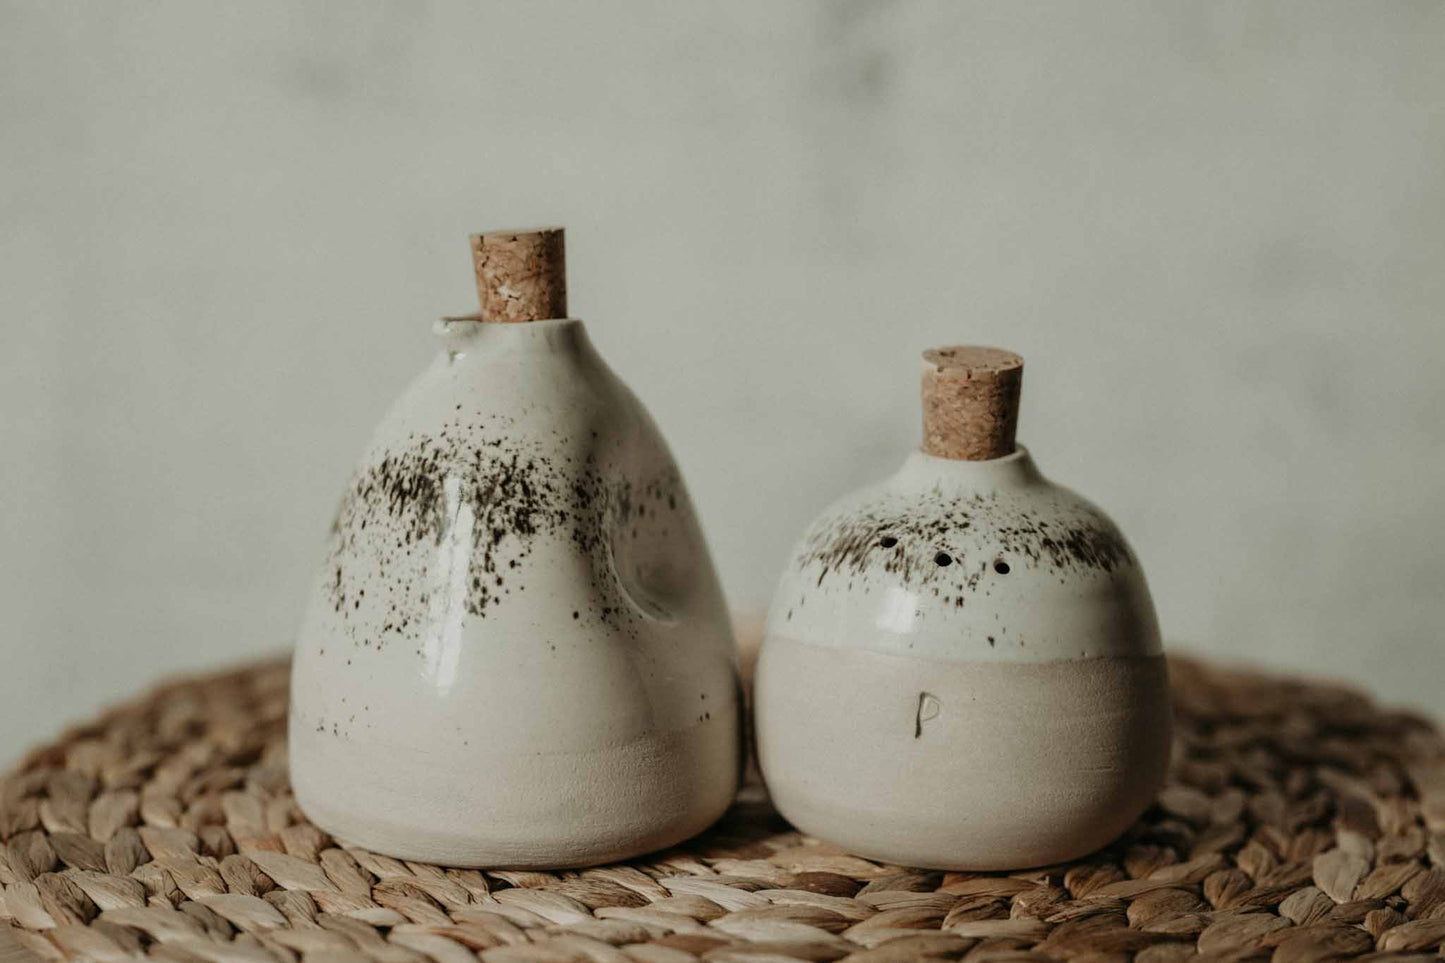 Add rustic style to your kitchen with this unique handmade stoneware oil pourer. Perfect for housewarming gifts and everyday kitchen use, the ceramic oil dispenser is sure to please.